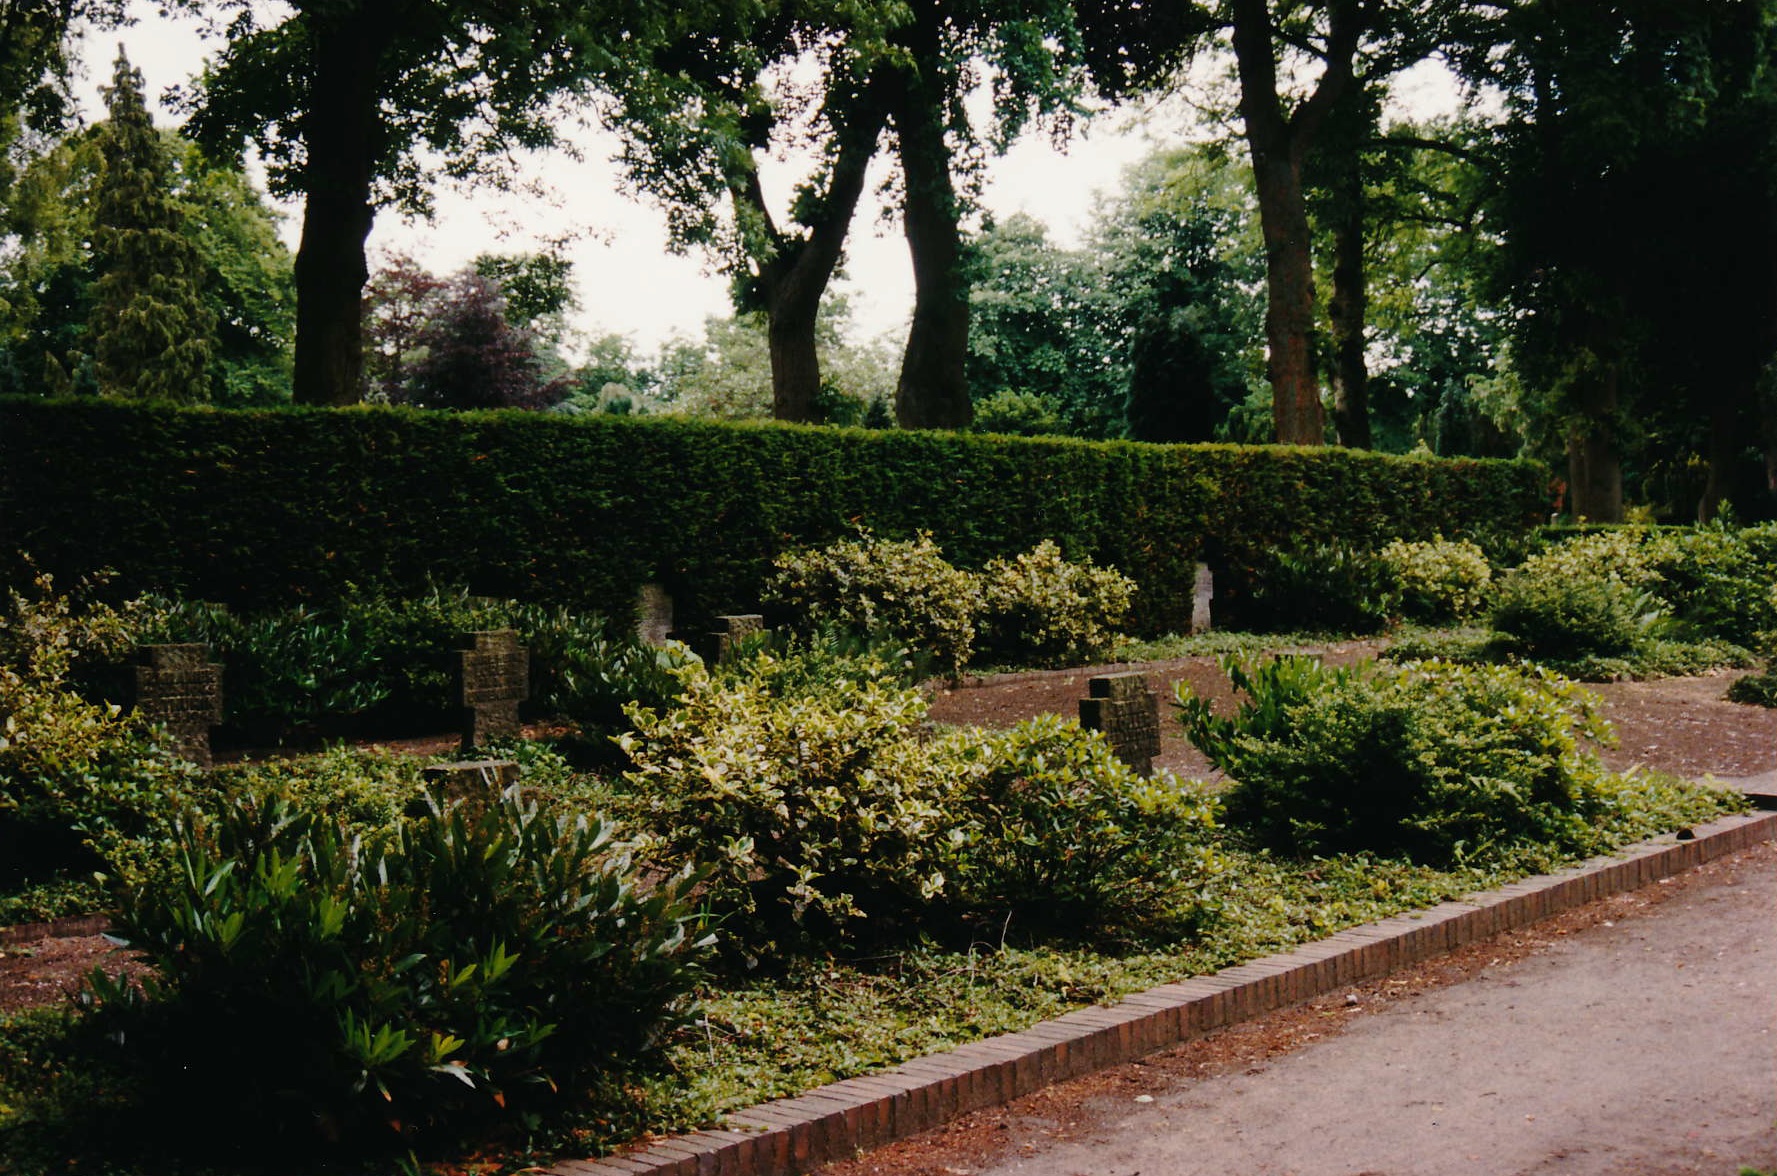 Buriel ground for soldiers, where probably the polish soldier was burried 